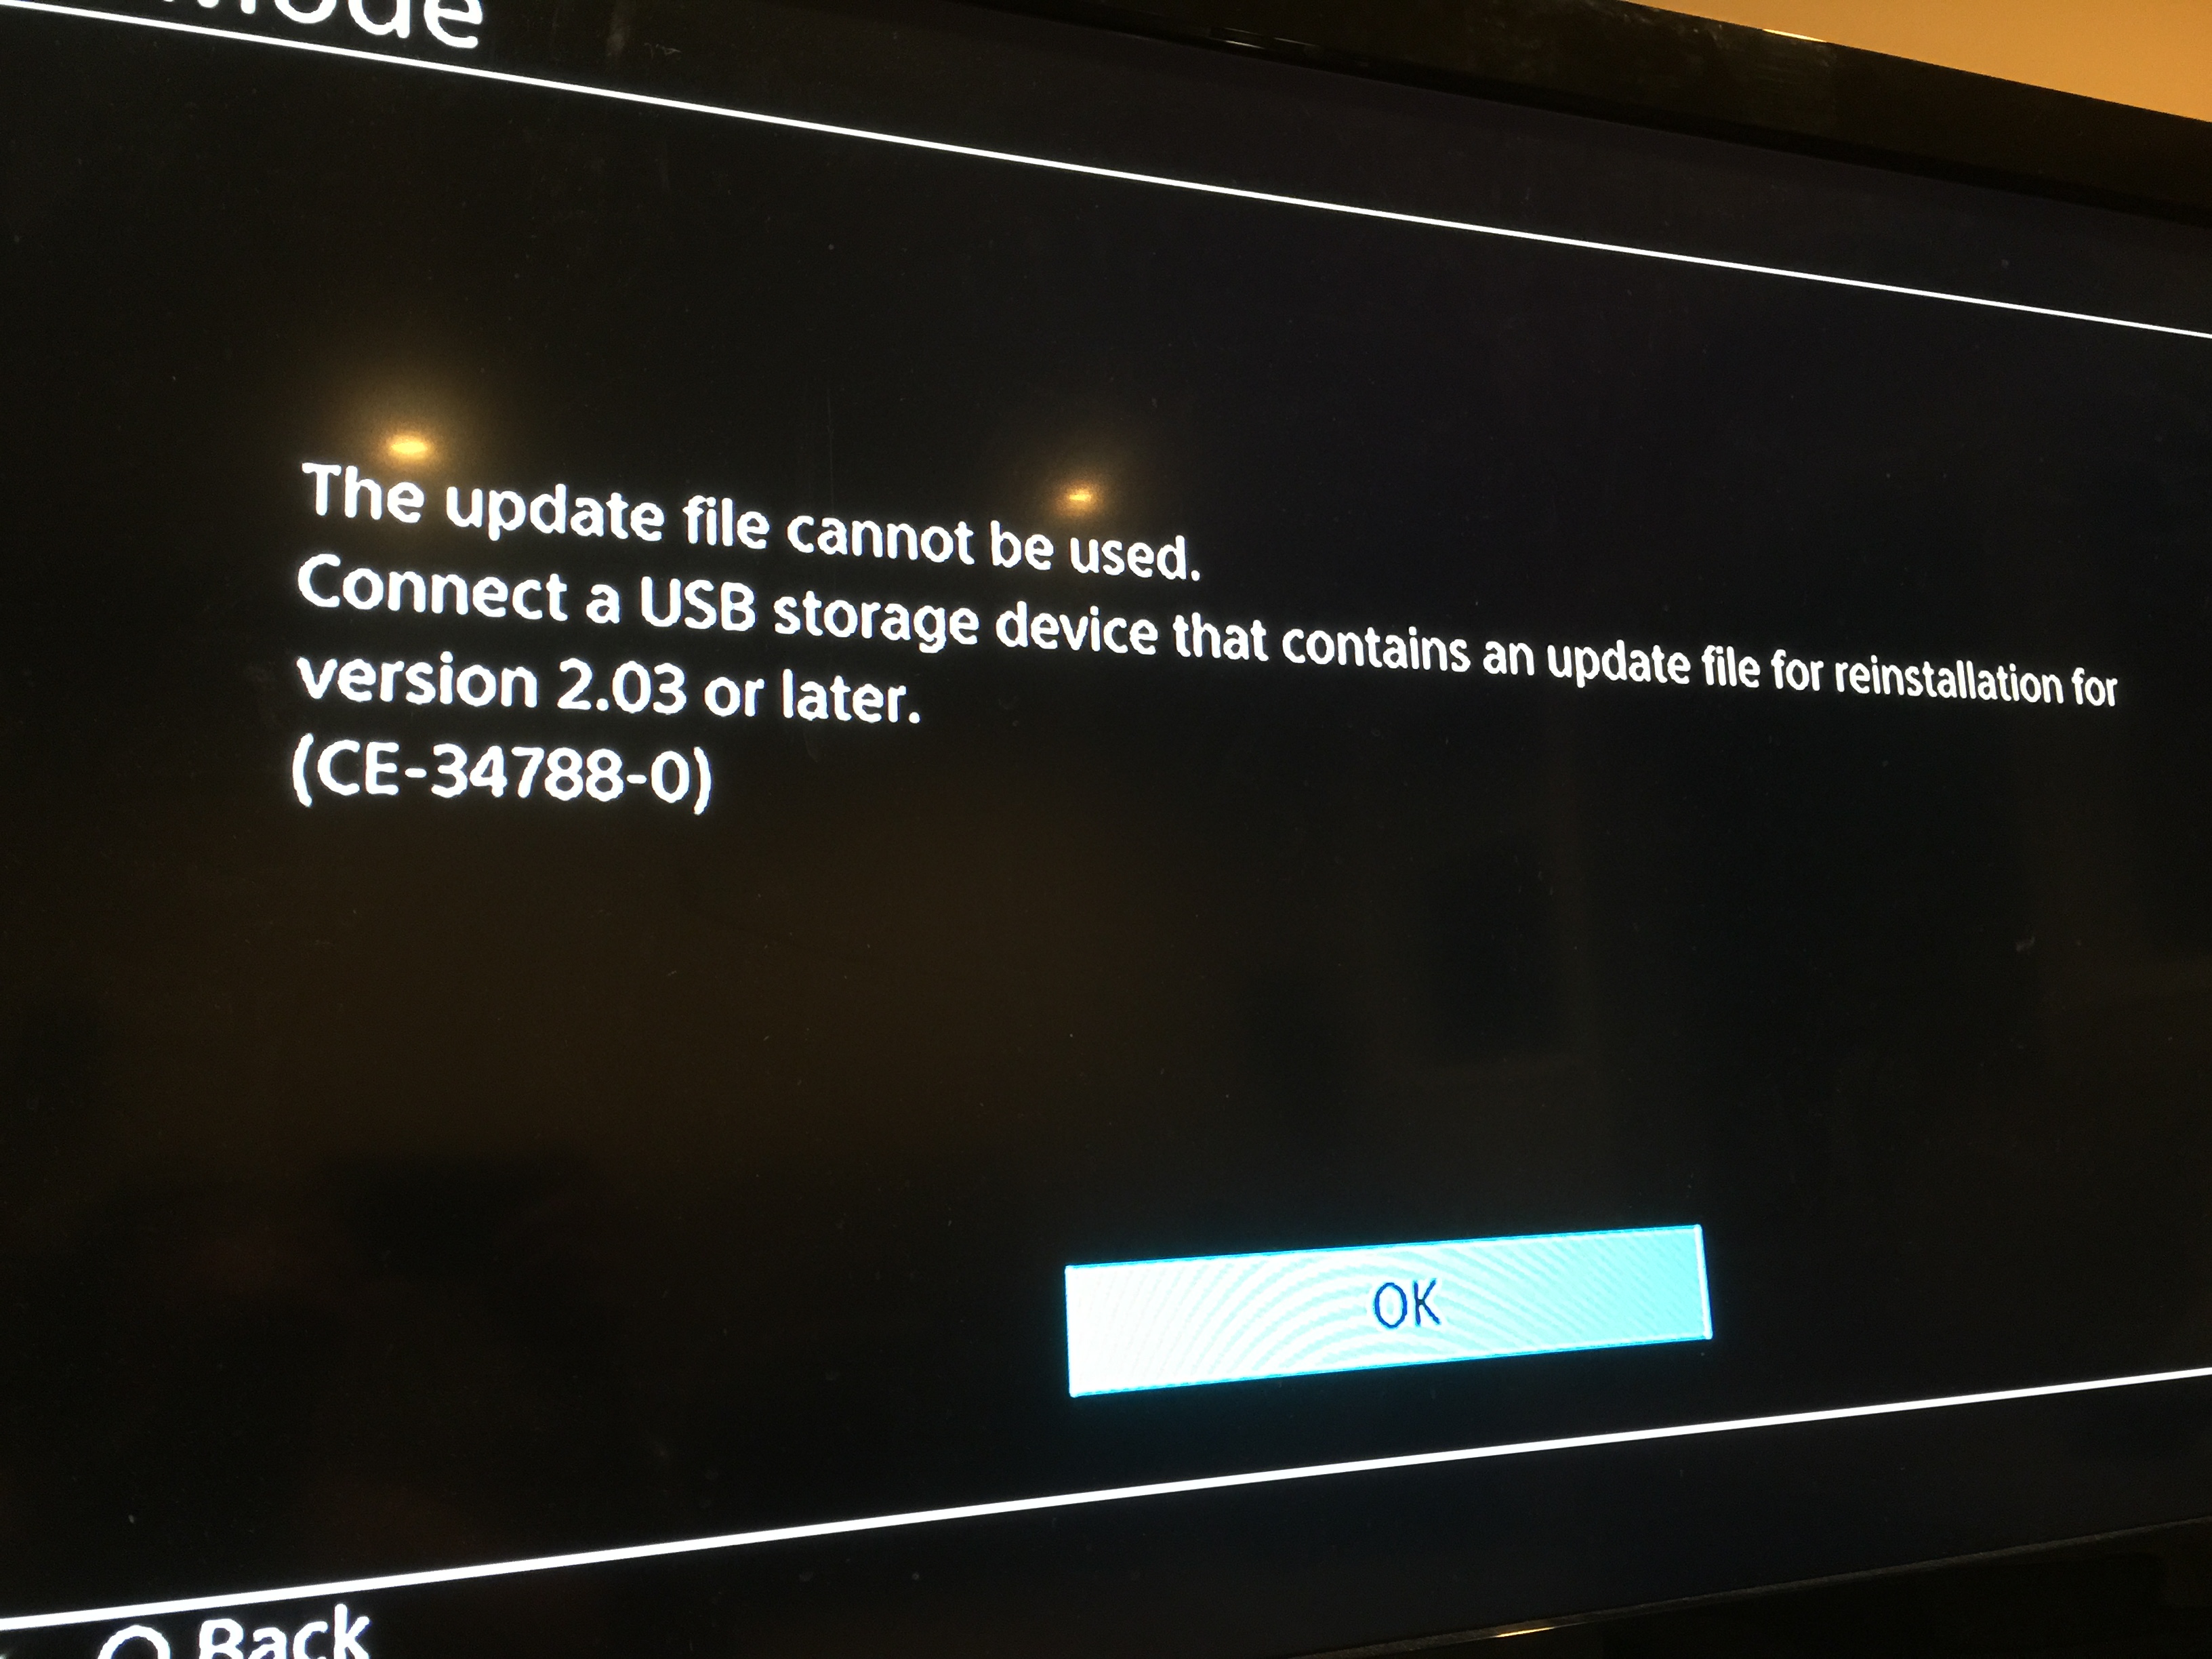 how to install update file for reinstallation ps4 without usb